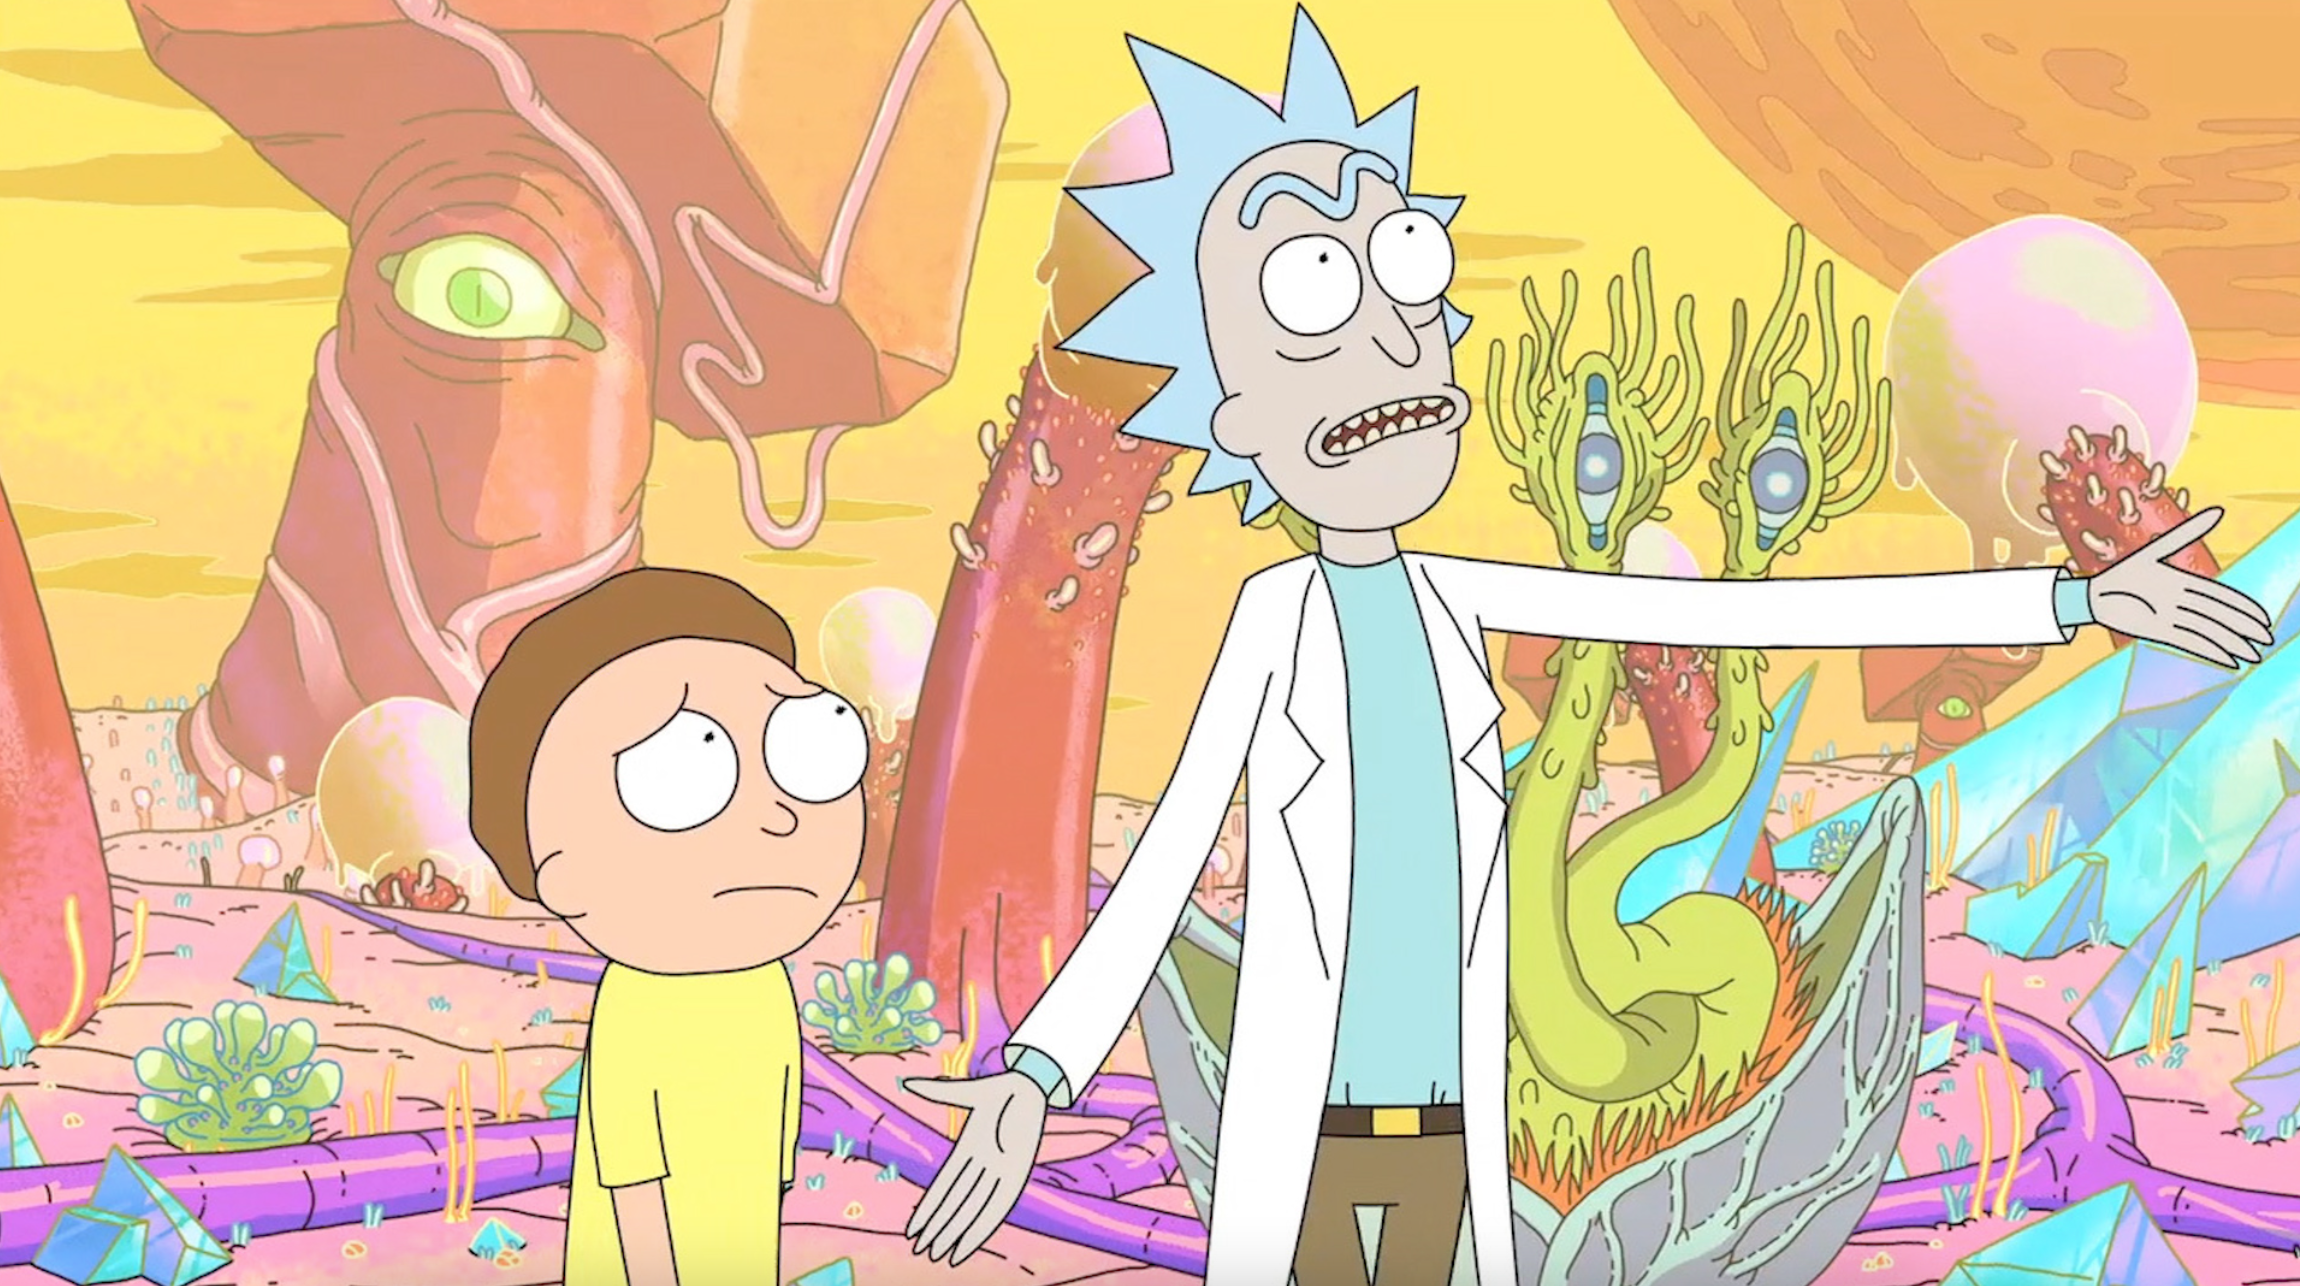 Rick and Morty available on UK Netflix